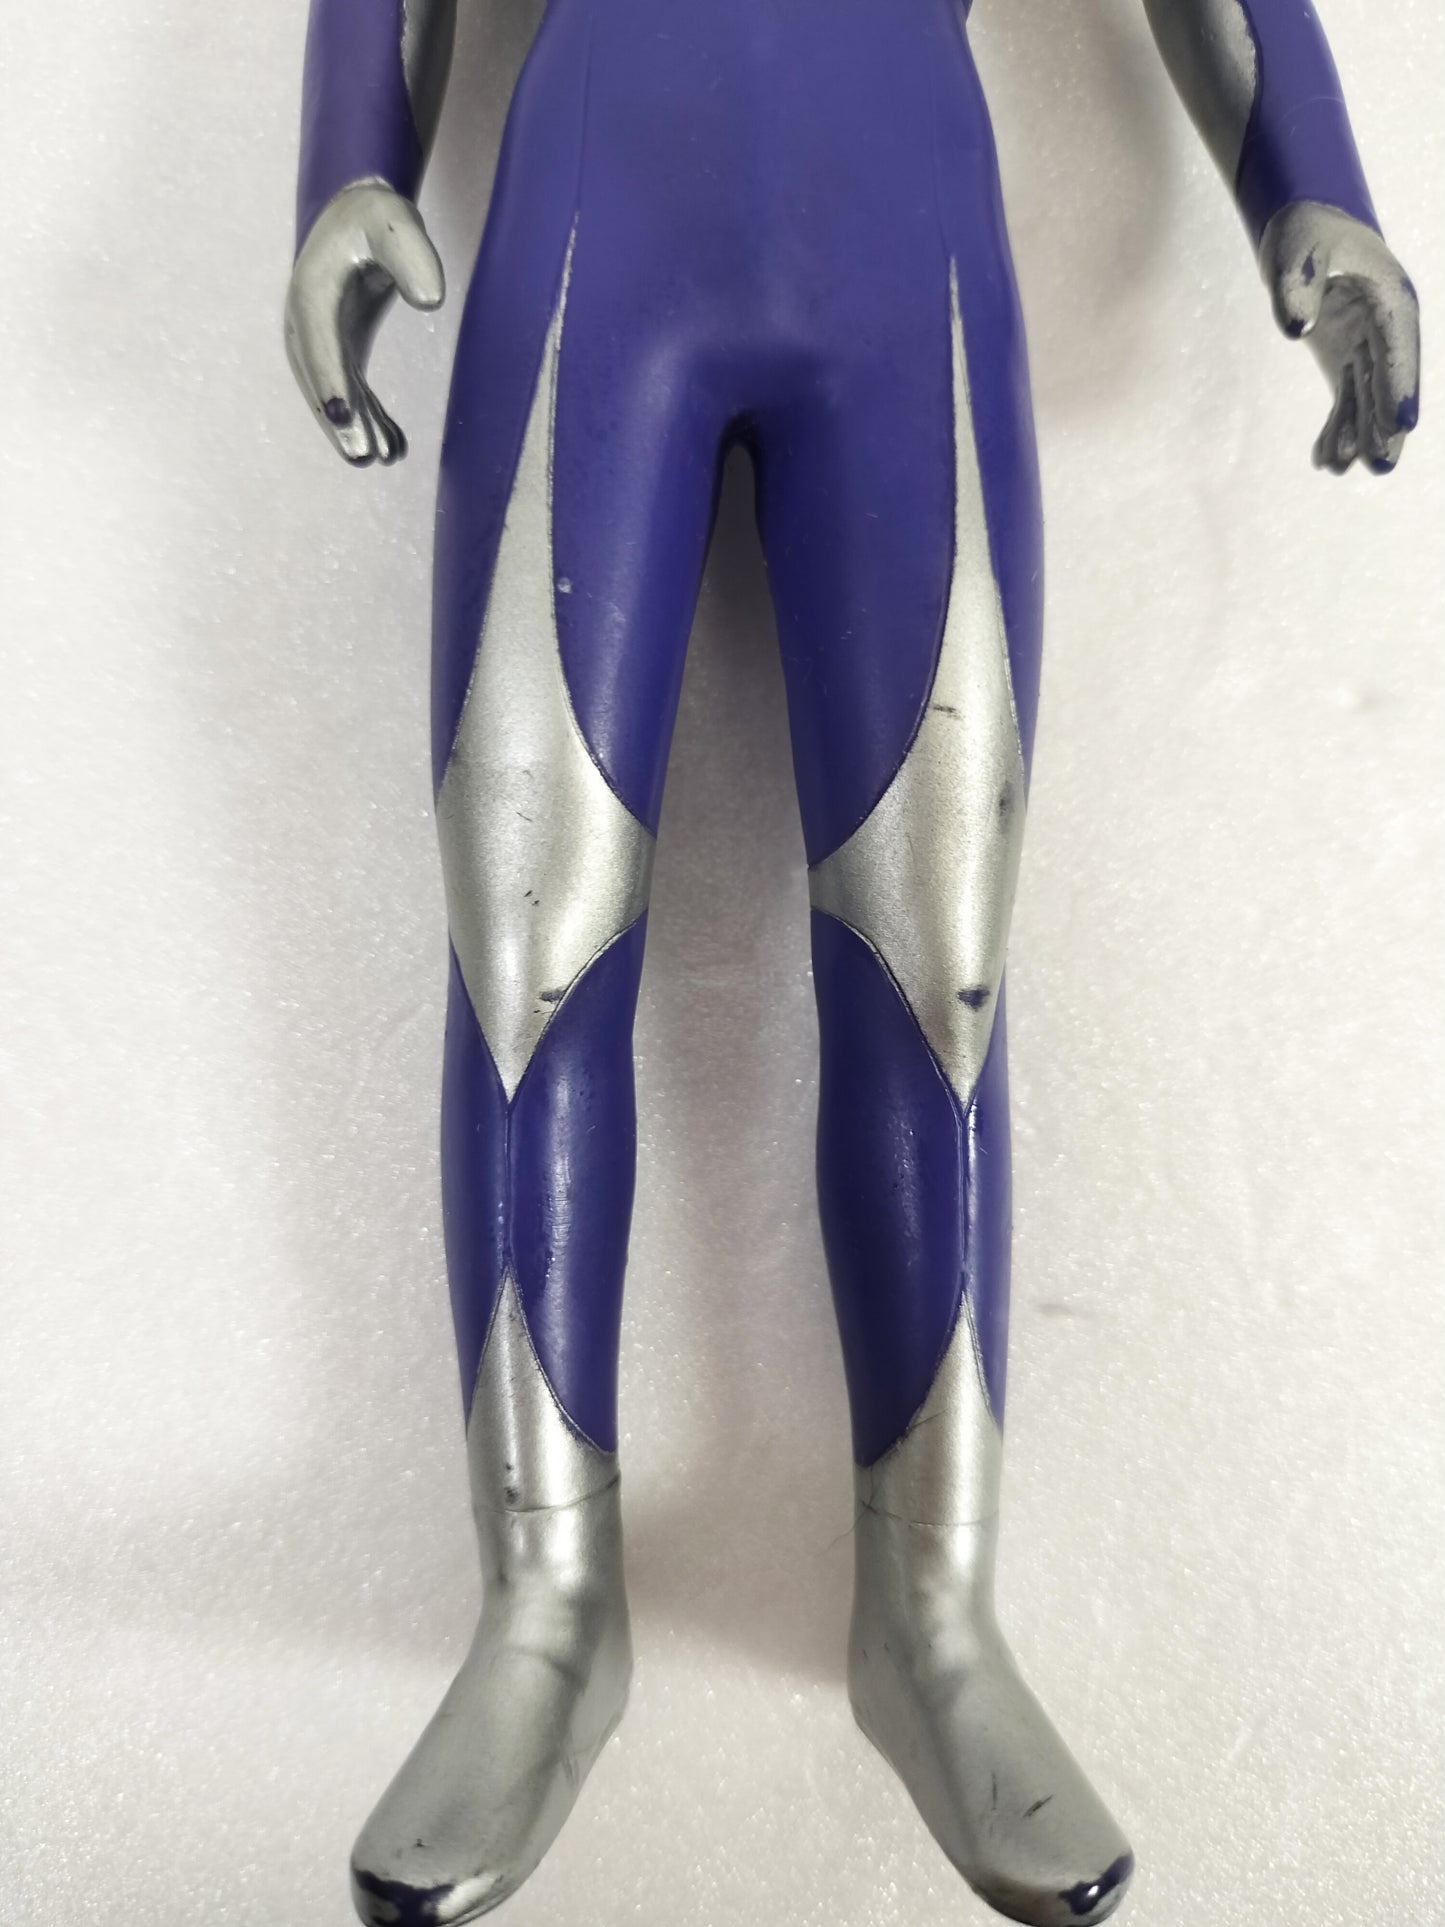 Ultraman Tiga (Sky type) Made in China Height about 17cm Manufactured in 2000 Sofvi Figure retro vintage major scratches and dirt